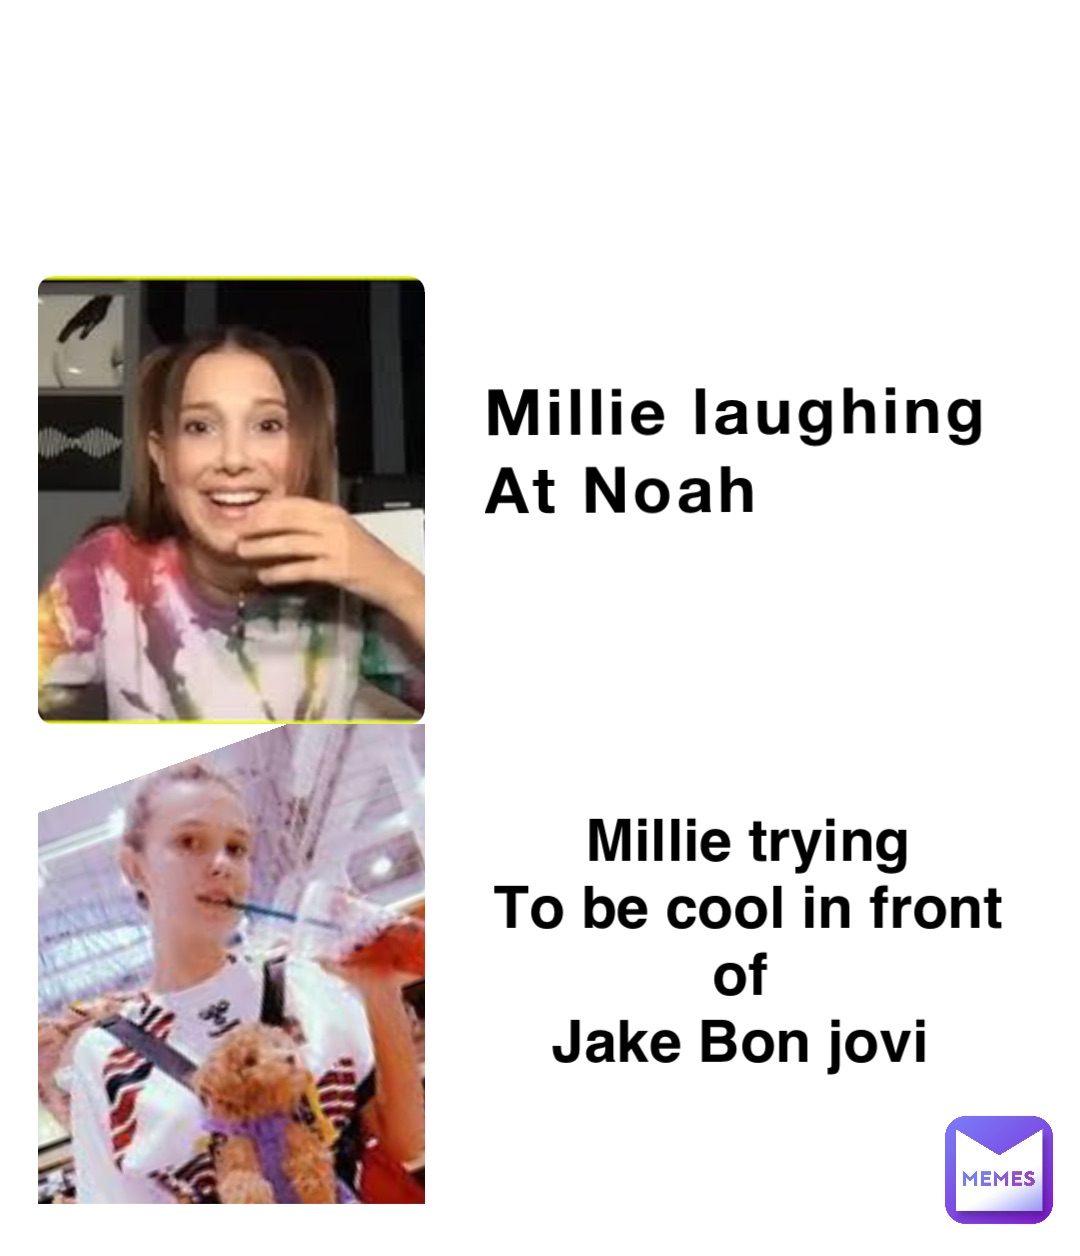 Millie laughing
At Noah Millie trying 
To be cool in front of
Jake Bon jovi